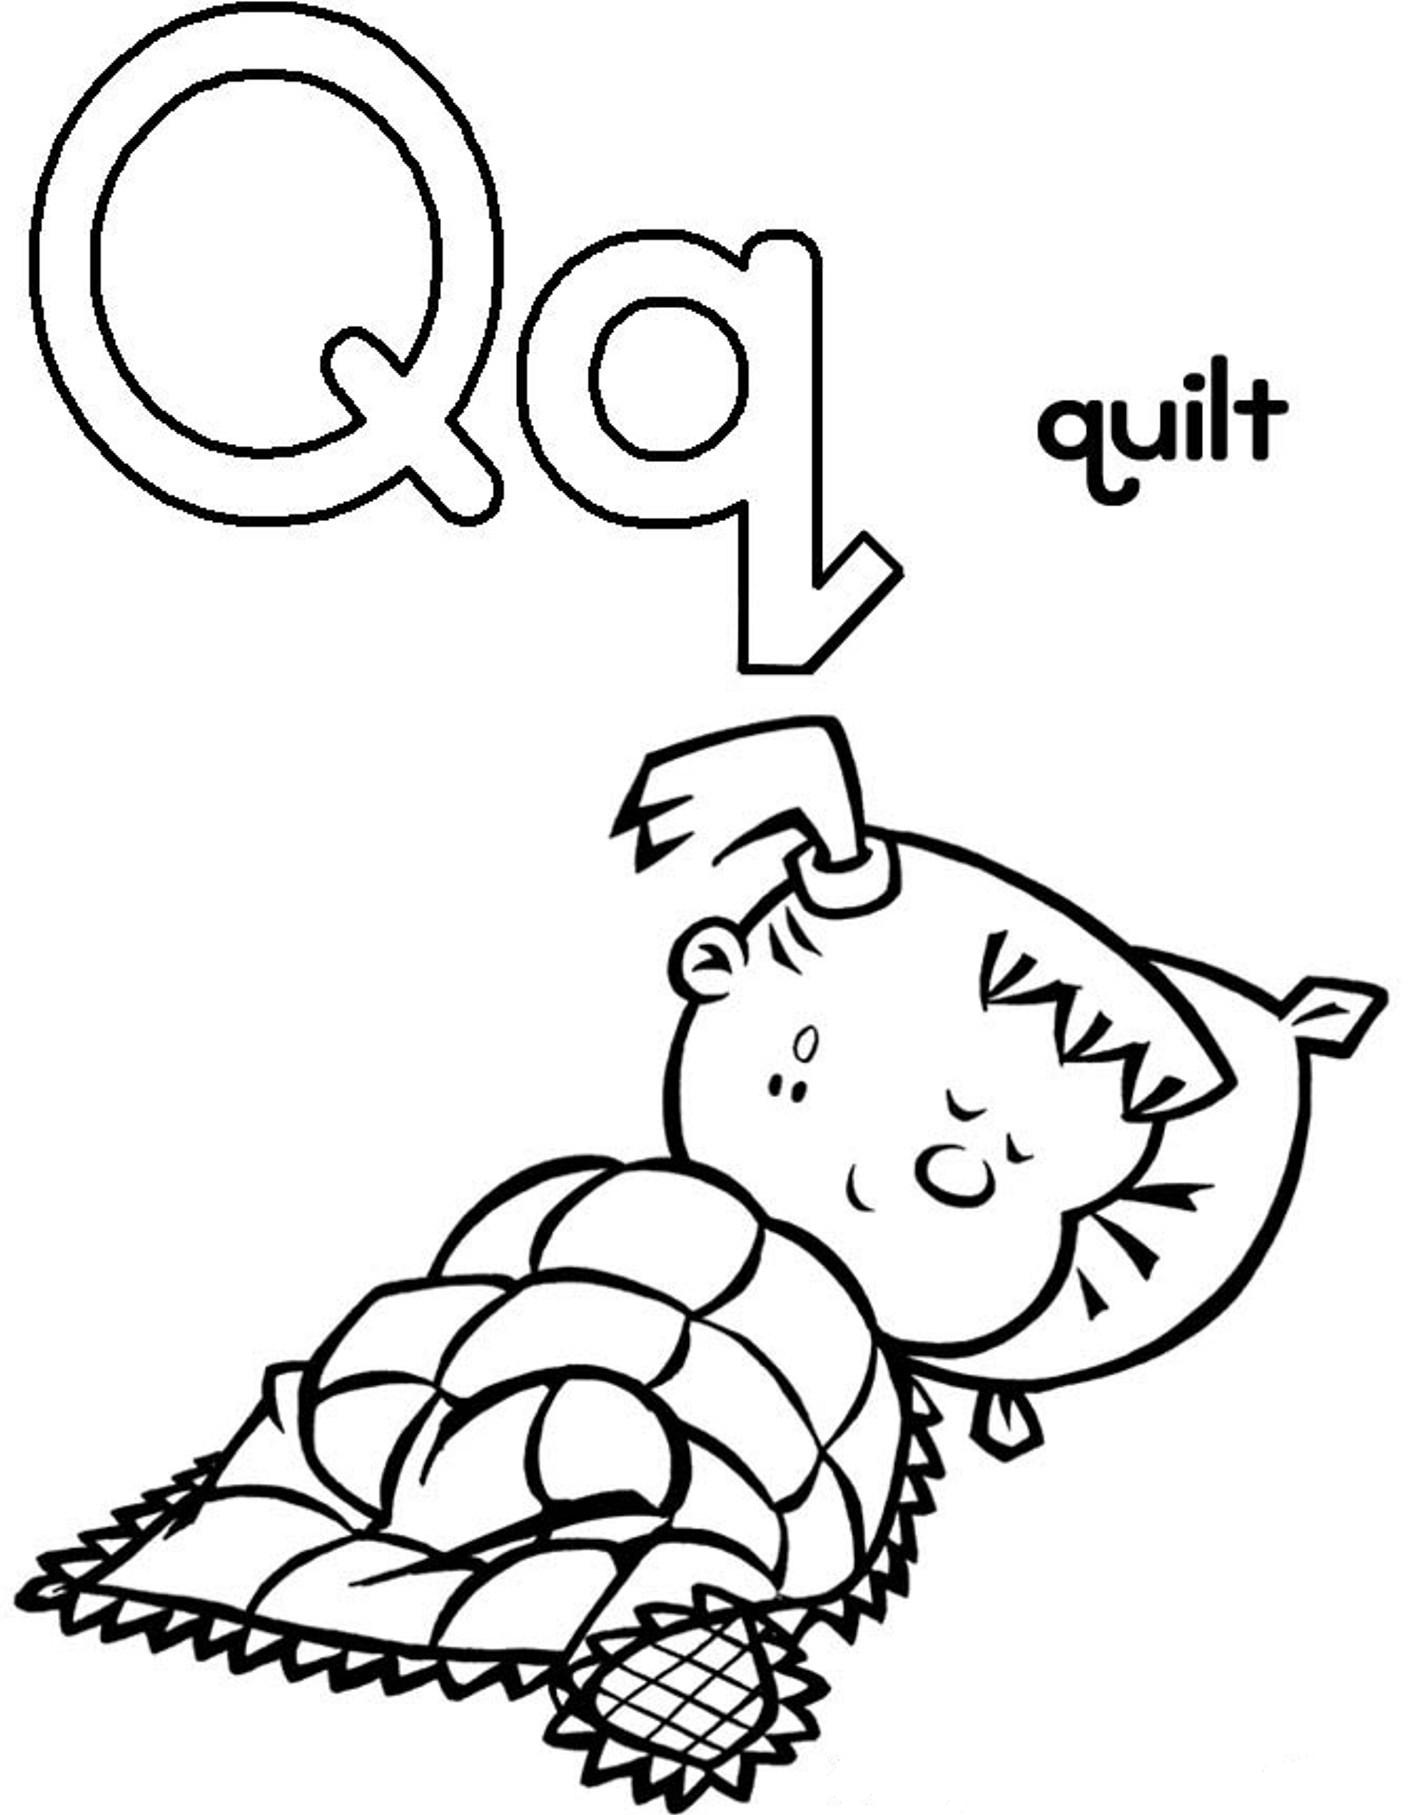 quilt coloring pages download - photo #21